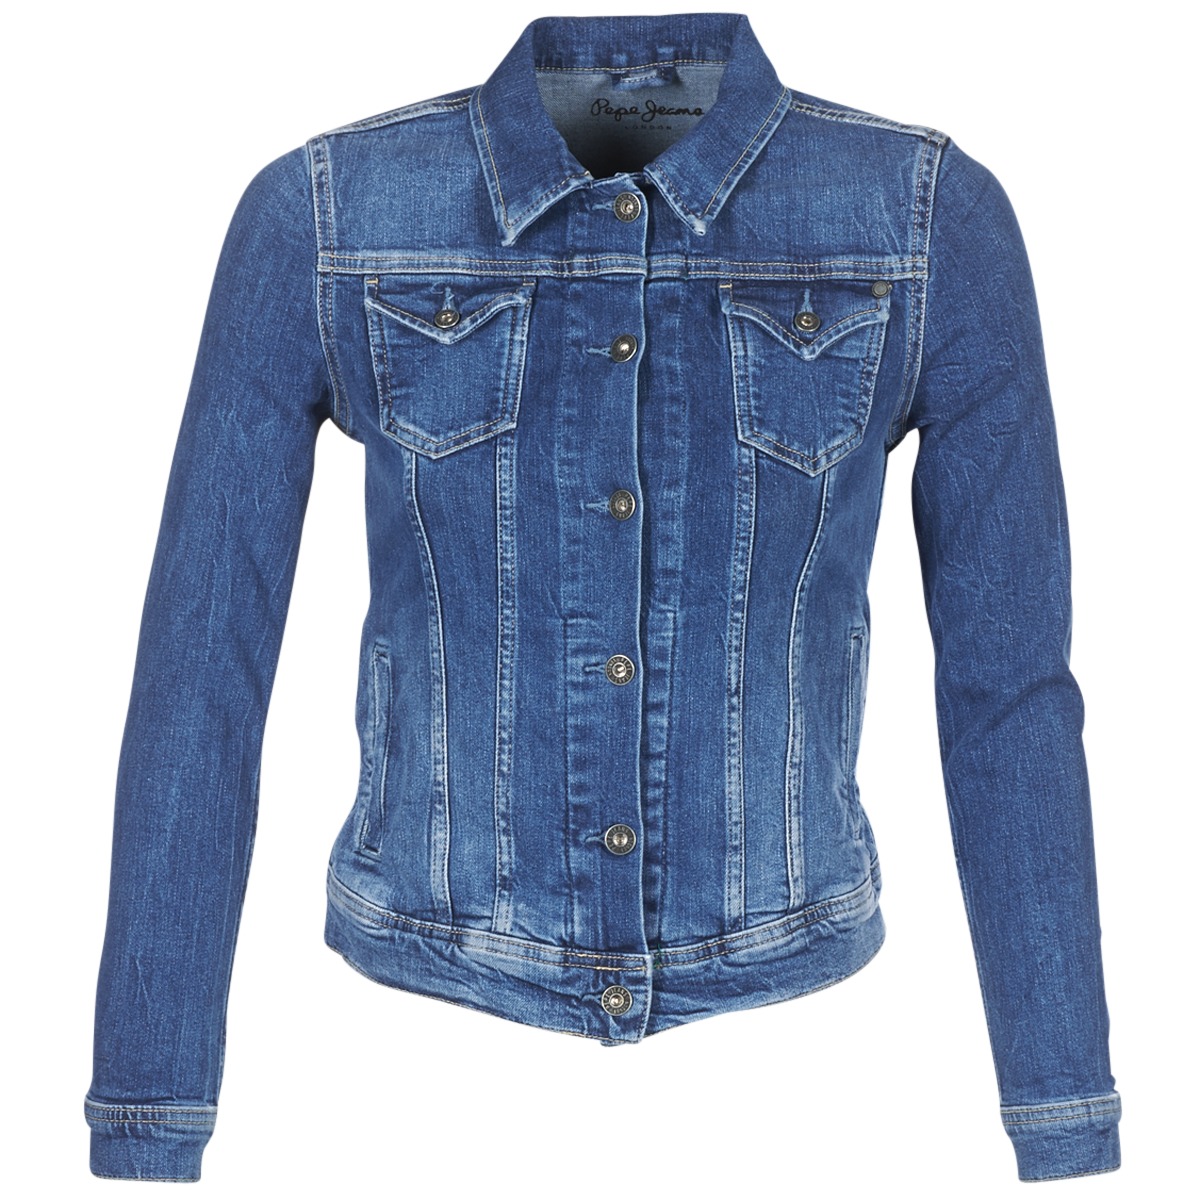 Pepe jeans THRIFT Blue / Medium - Fast delivery | Spartoo Europe ! -  Clothing Denim jackets Women 87,20 €